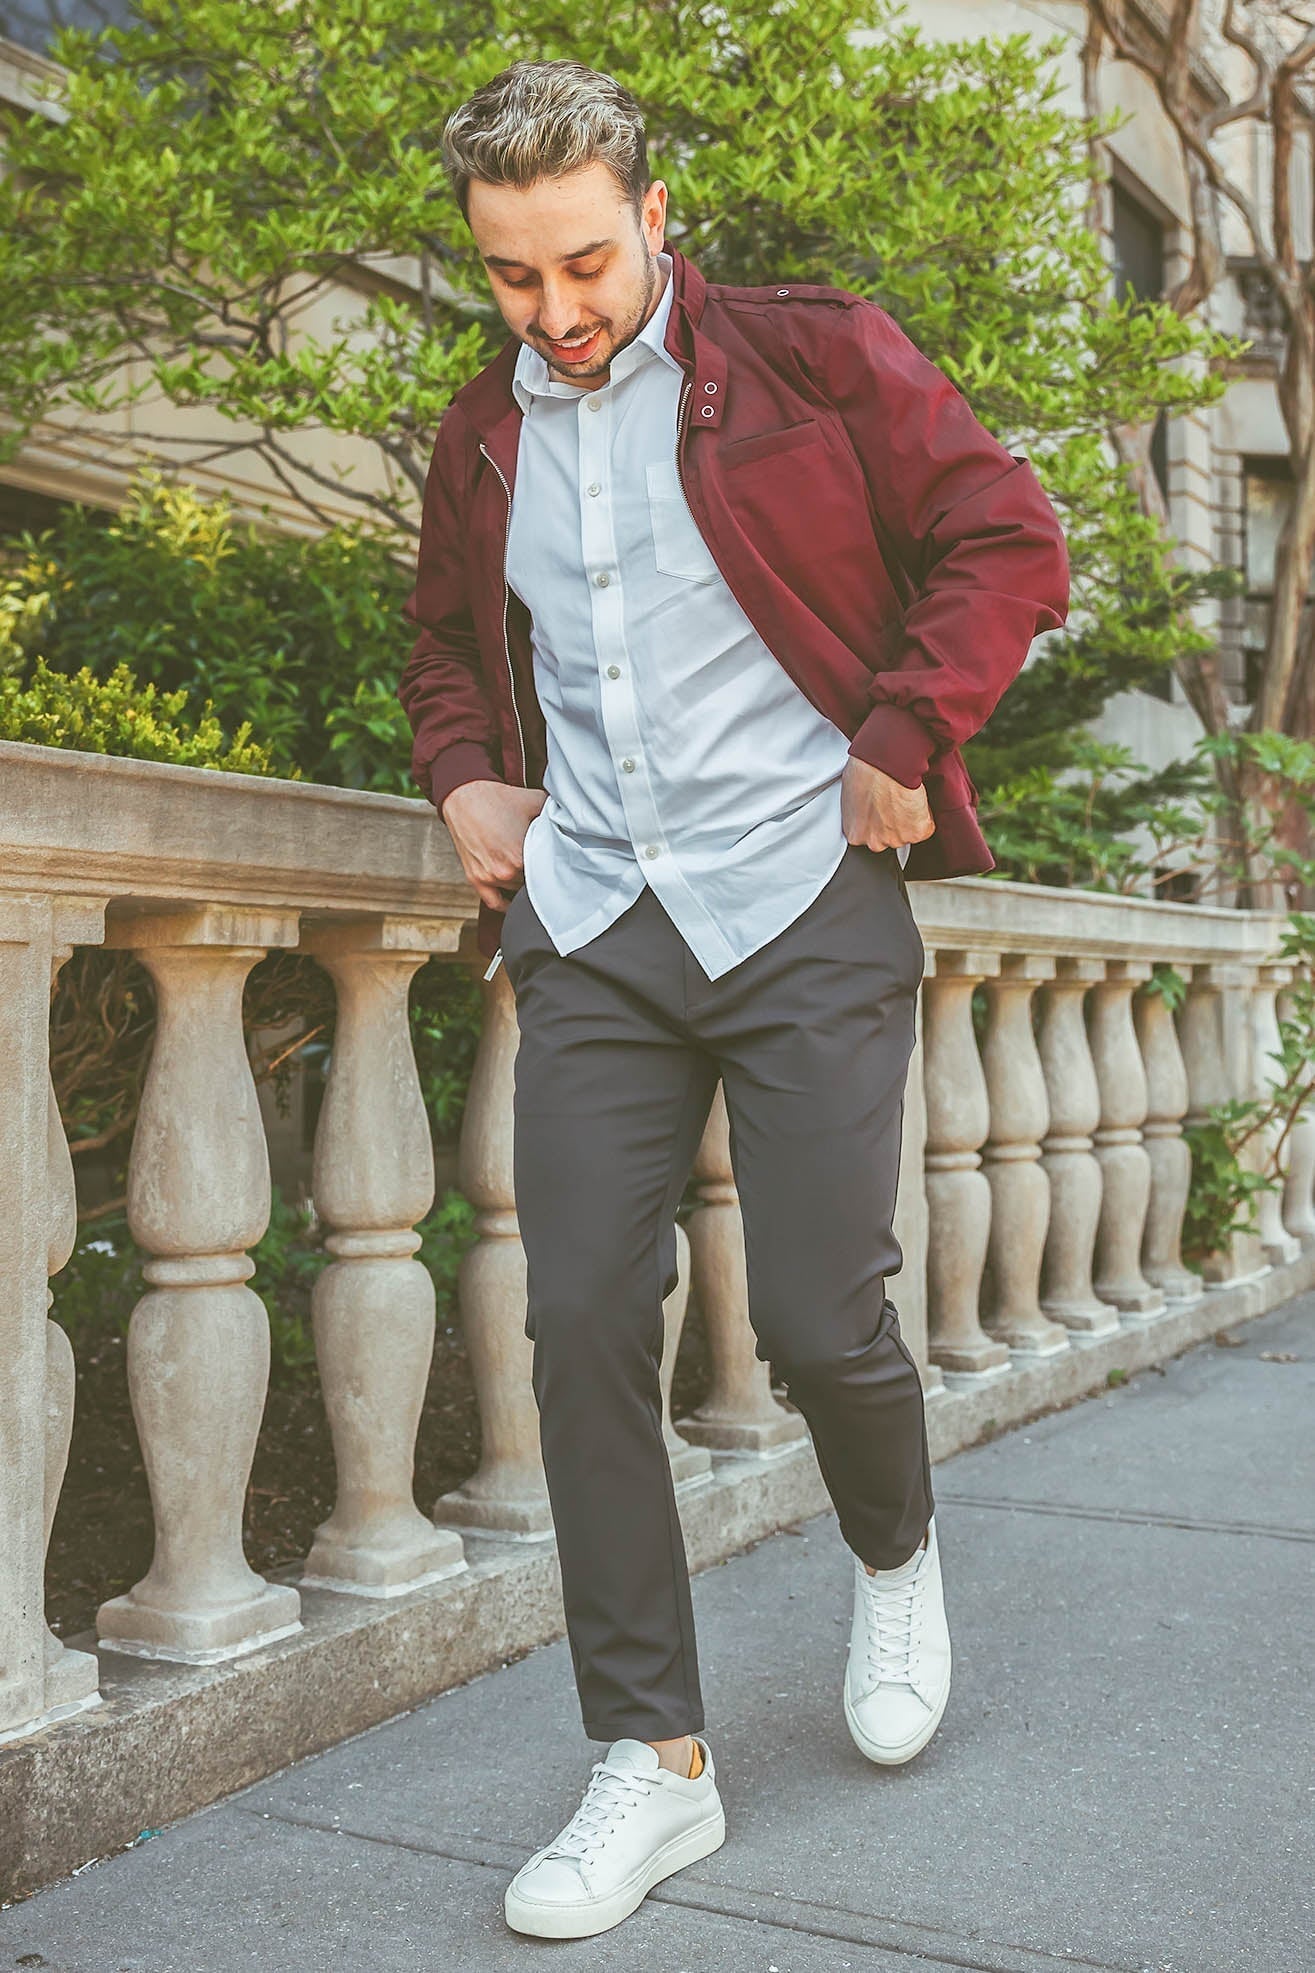 Male model wearing a red jacket with a button down shirt underneath, walking on sidewalk pulling charcoal super stretch performance pants up from under510.com